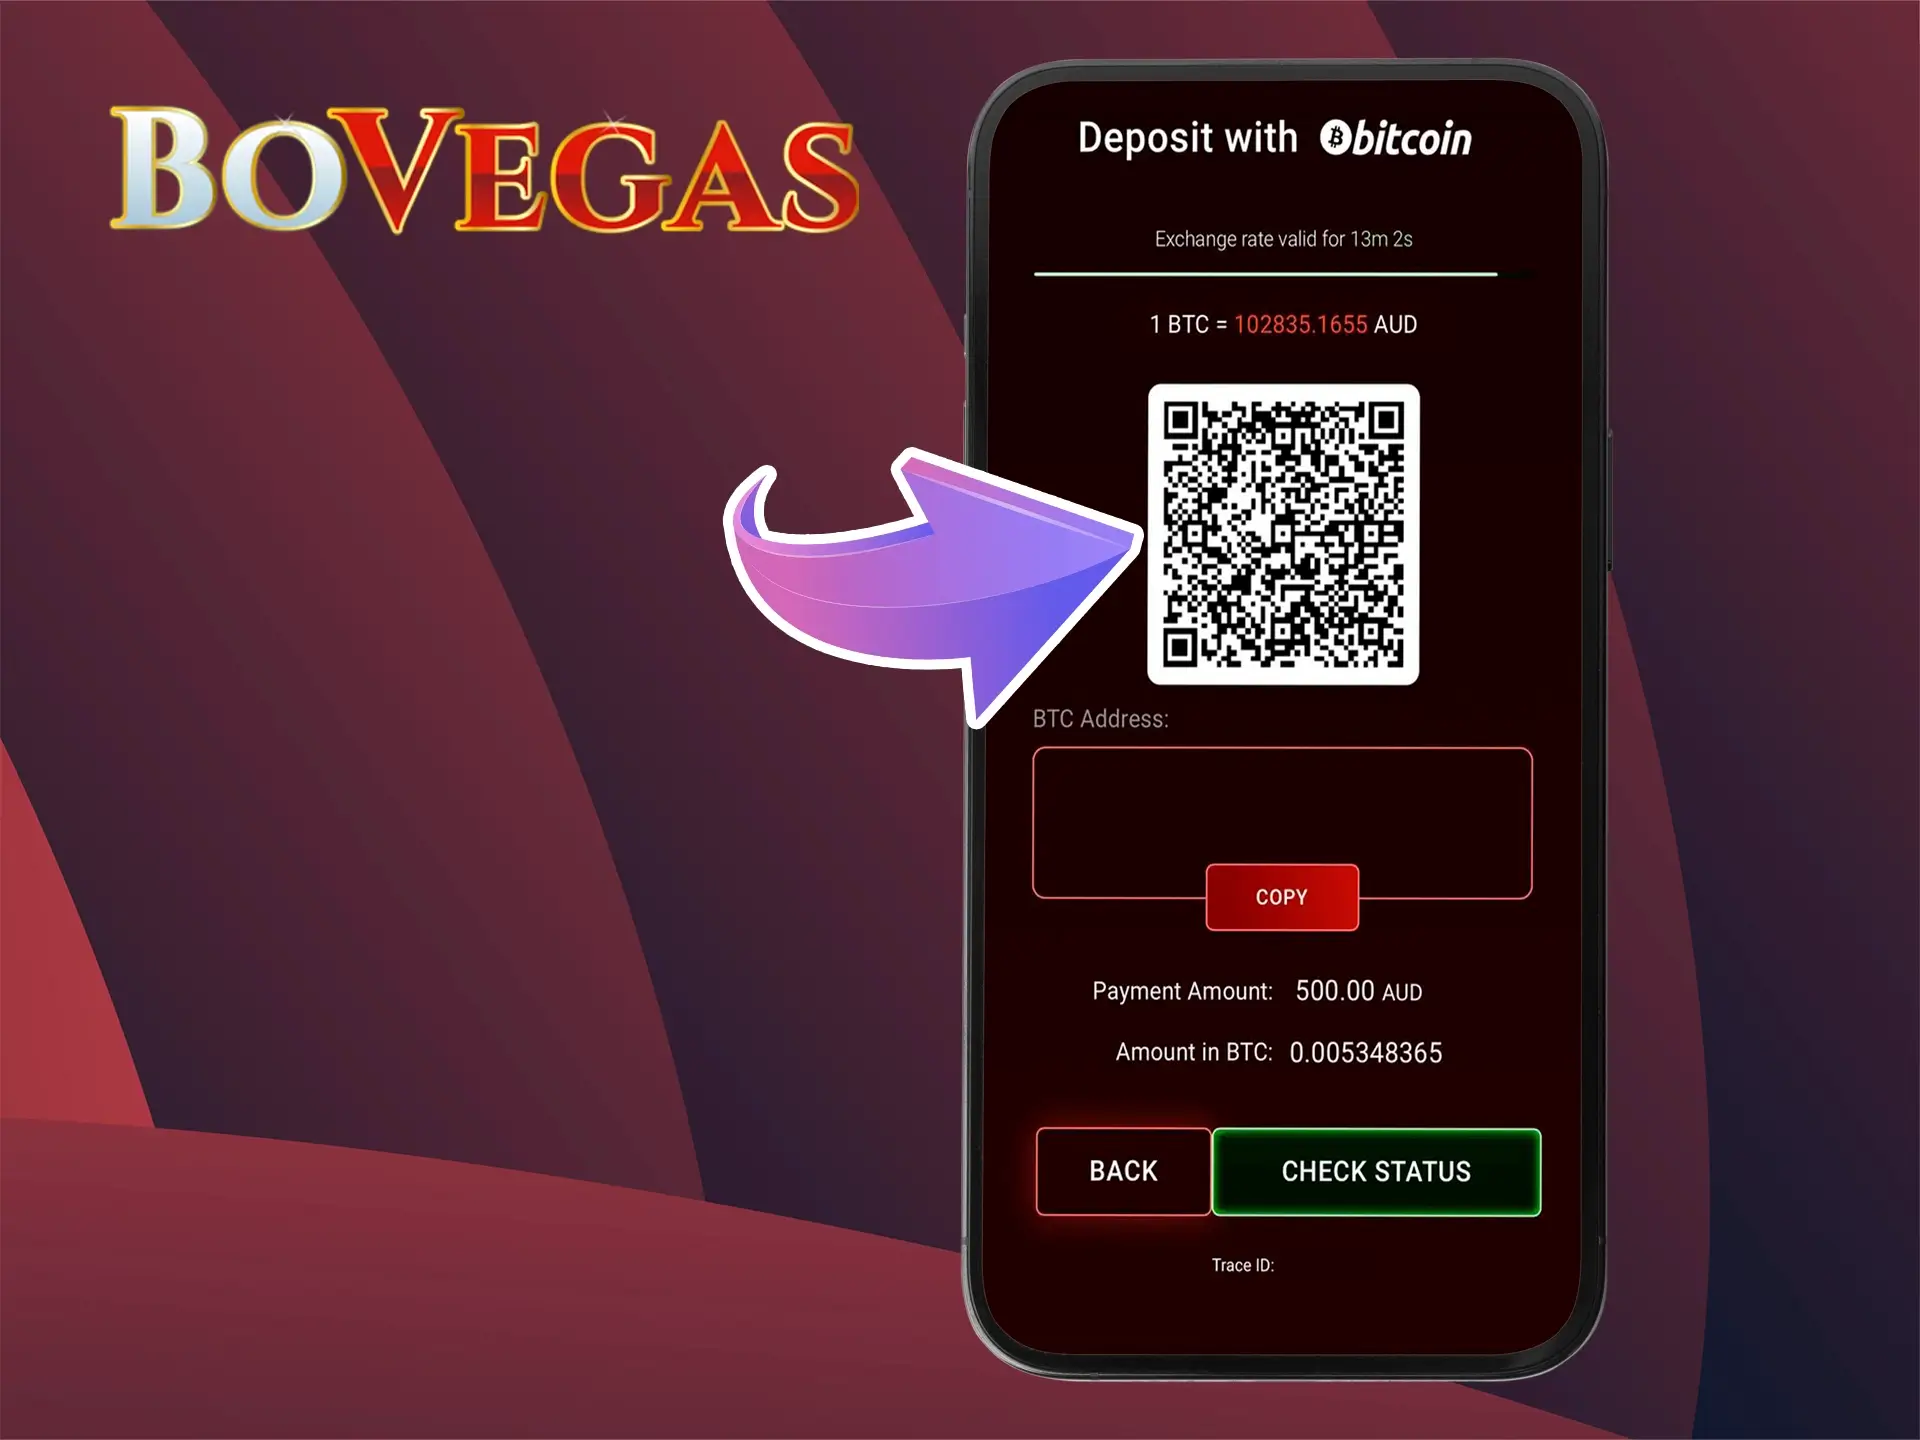 Go to your wallet and make a transfer to your personal BoVegas account.